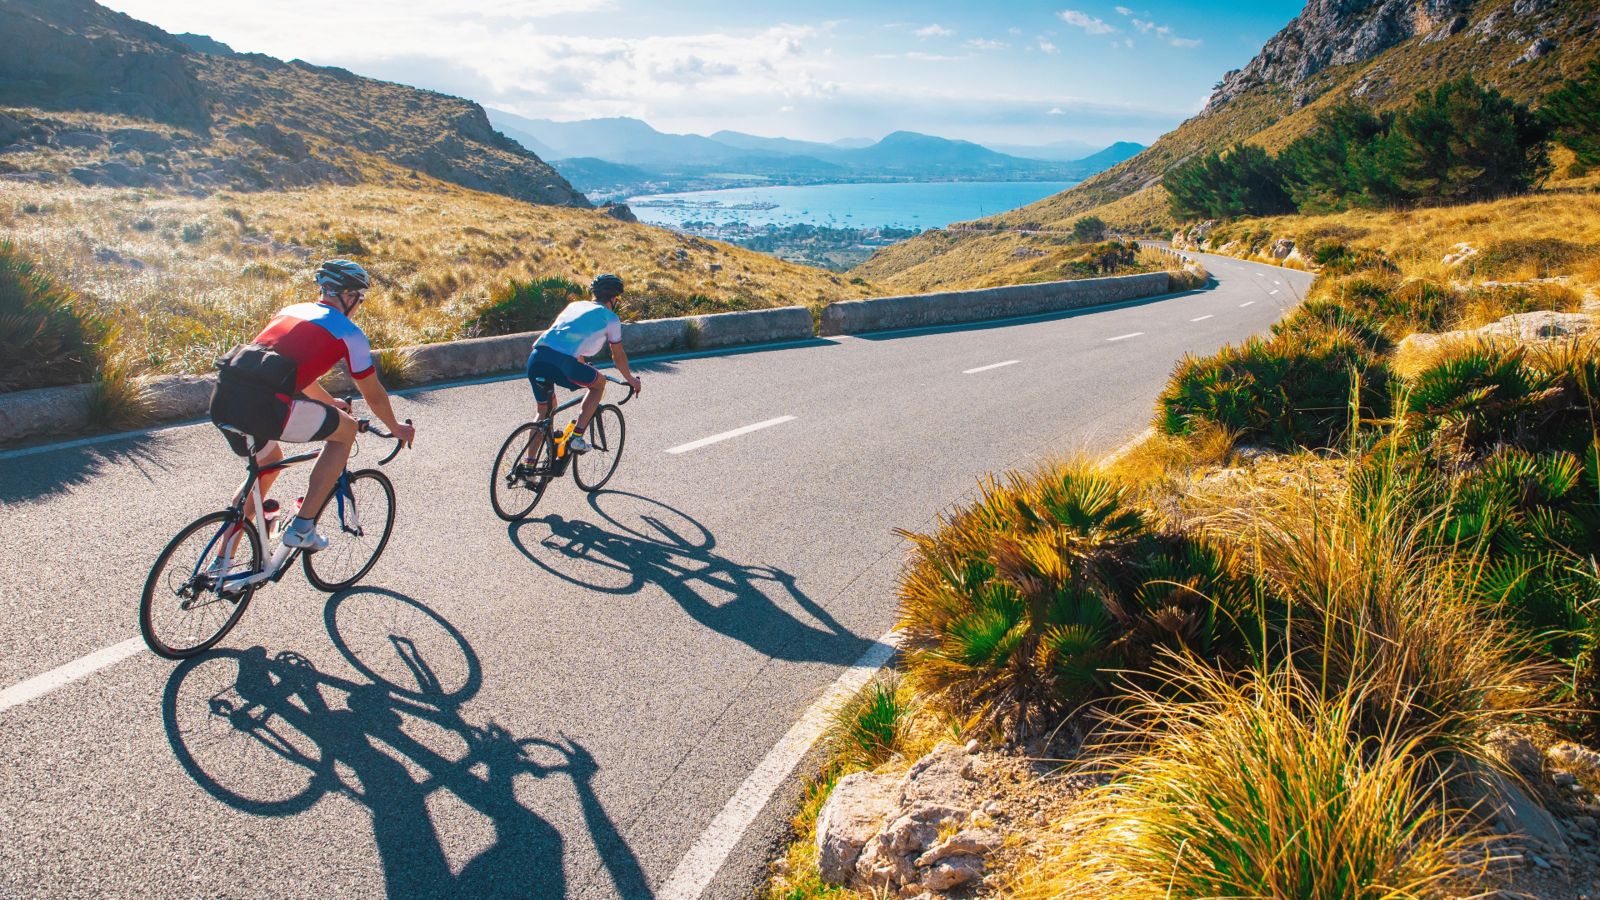 Two road cyclists in action with a beautiful bay in the background